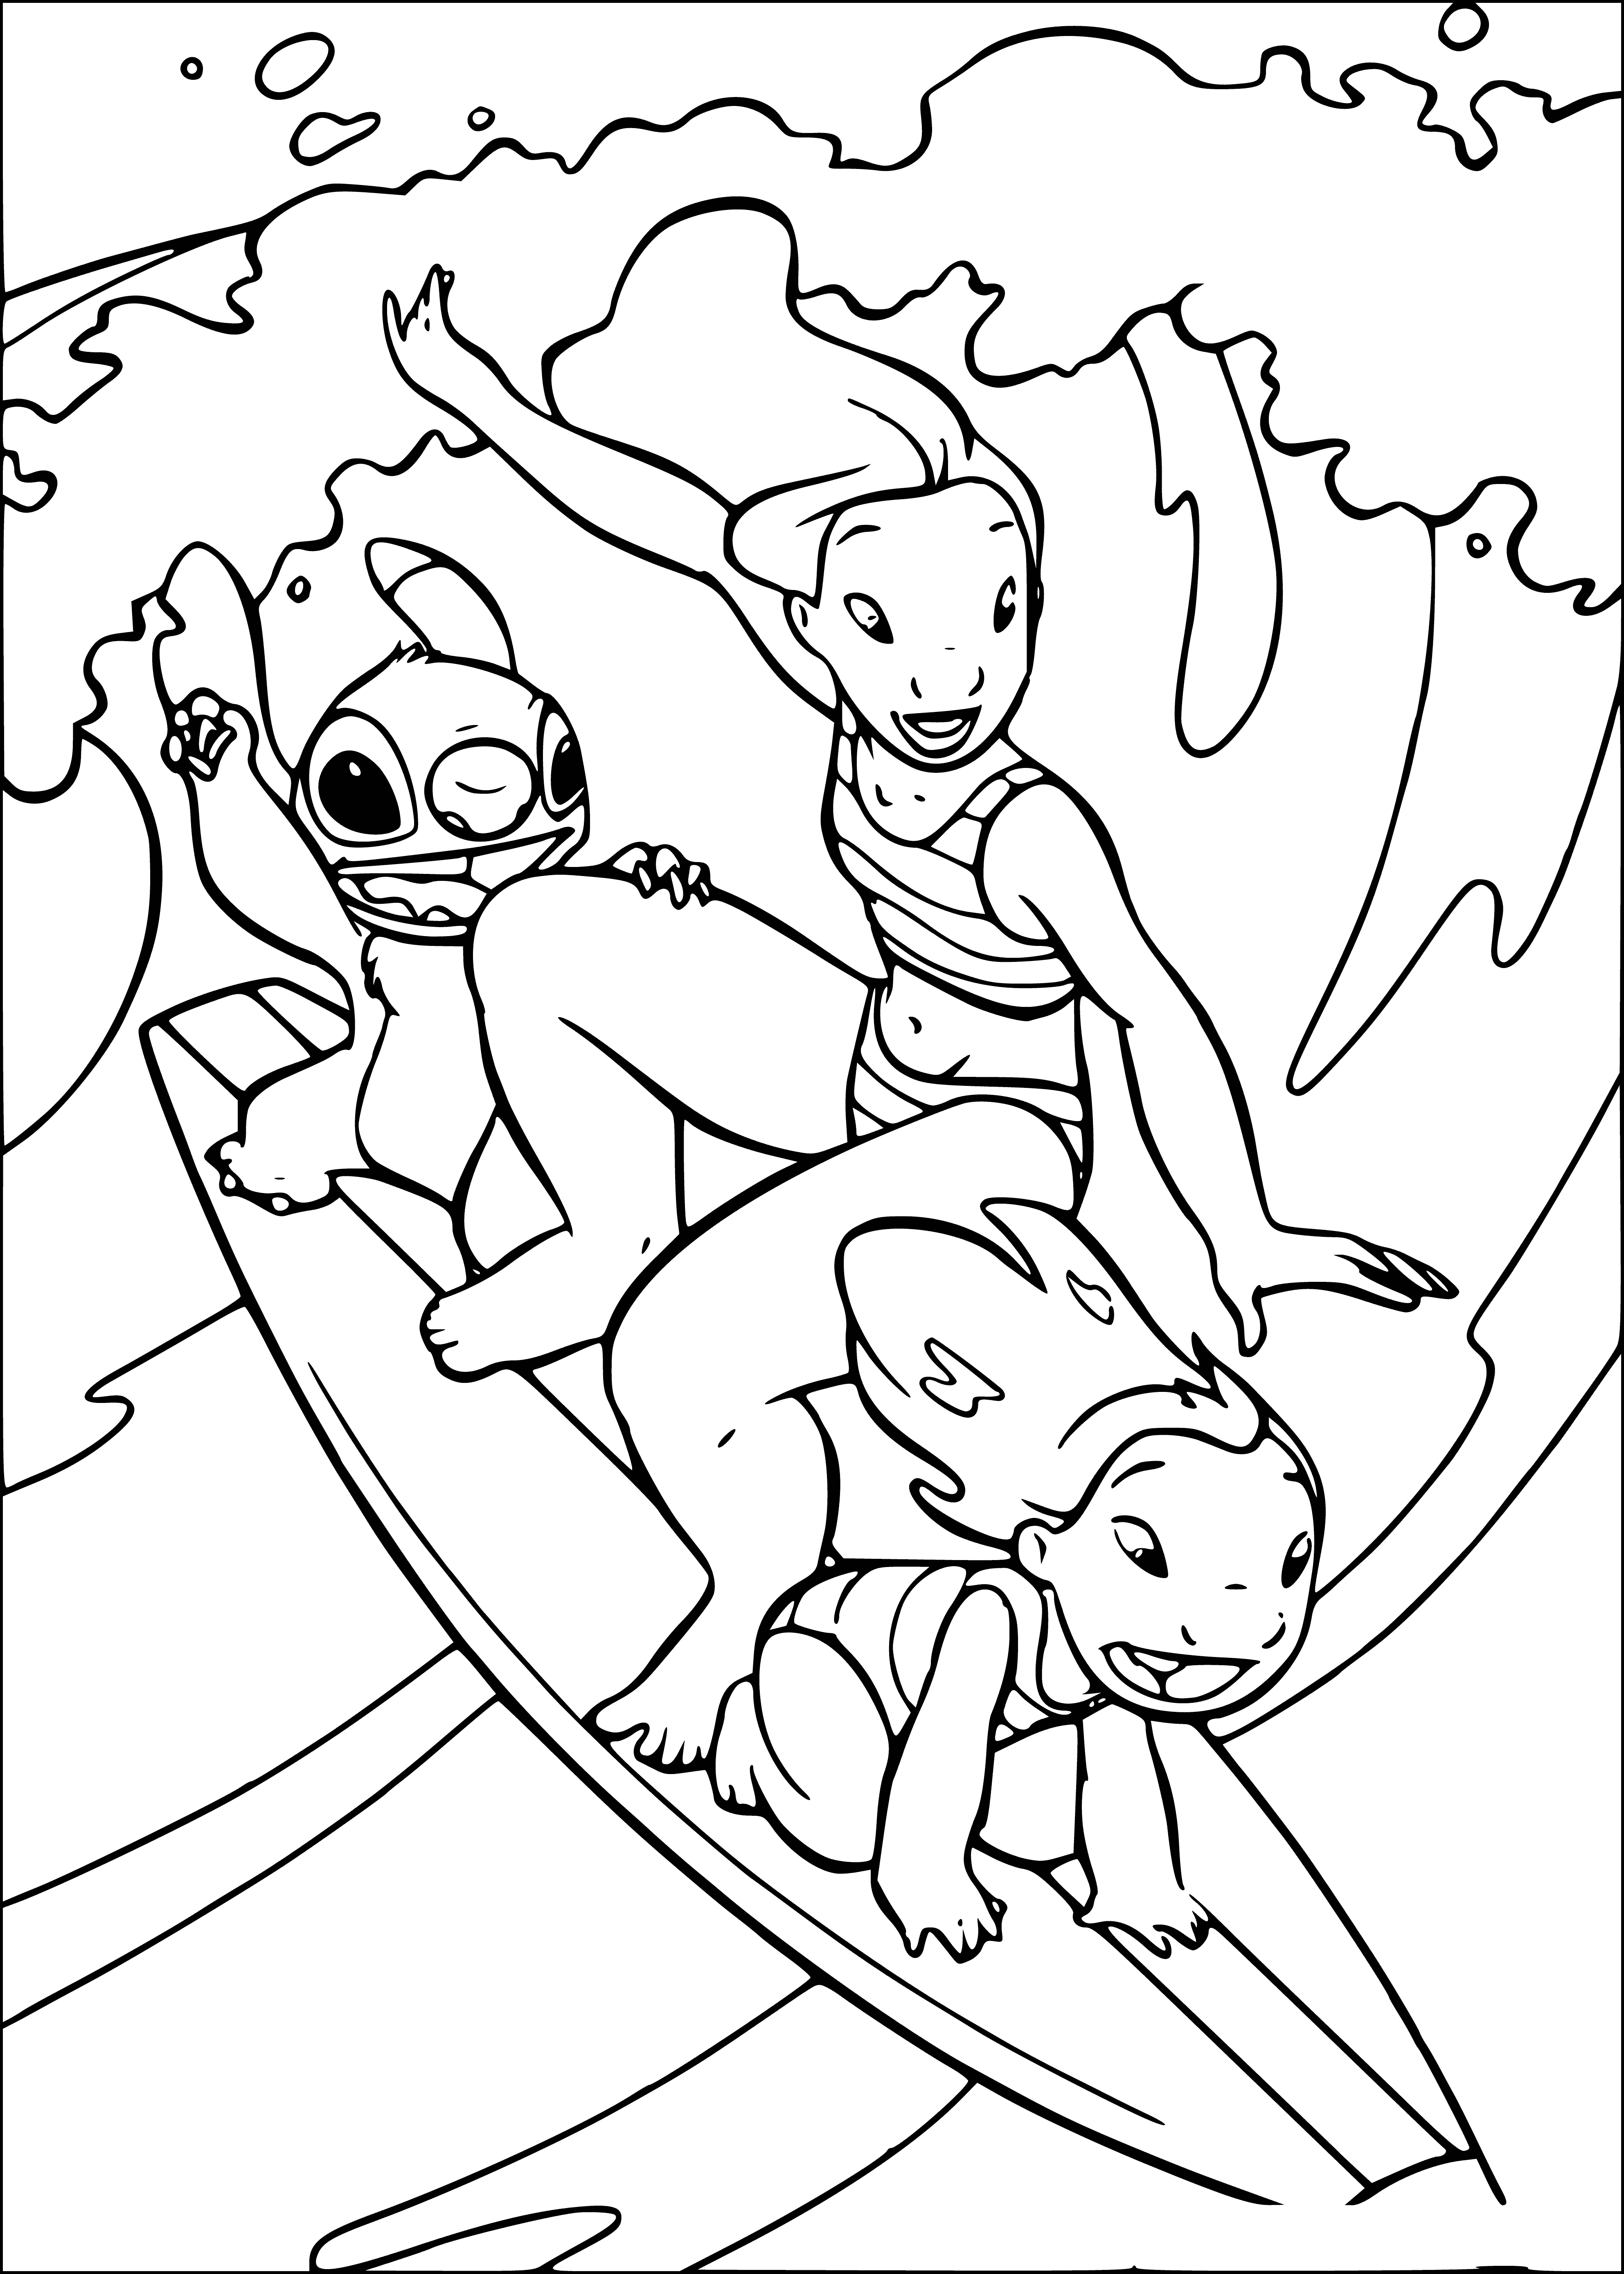 coloring page: 8yo girl in white tank & blue shorts, smiling big & hugged by plush blue alien & white dog. Toys show her love & she theirs.